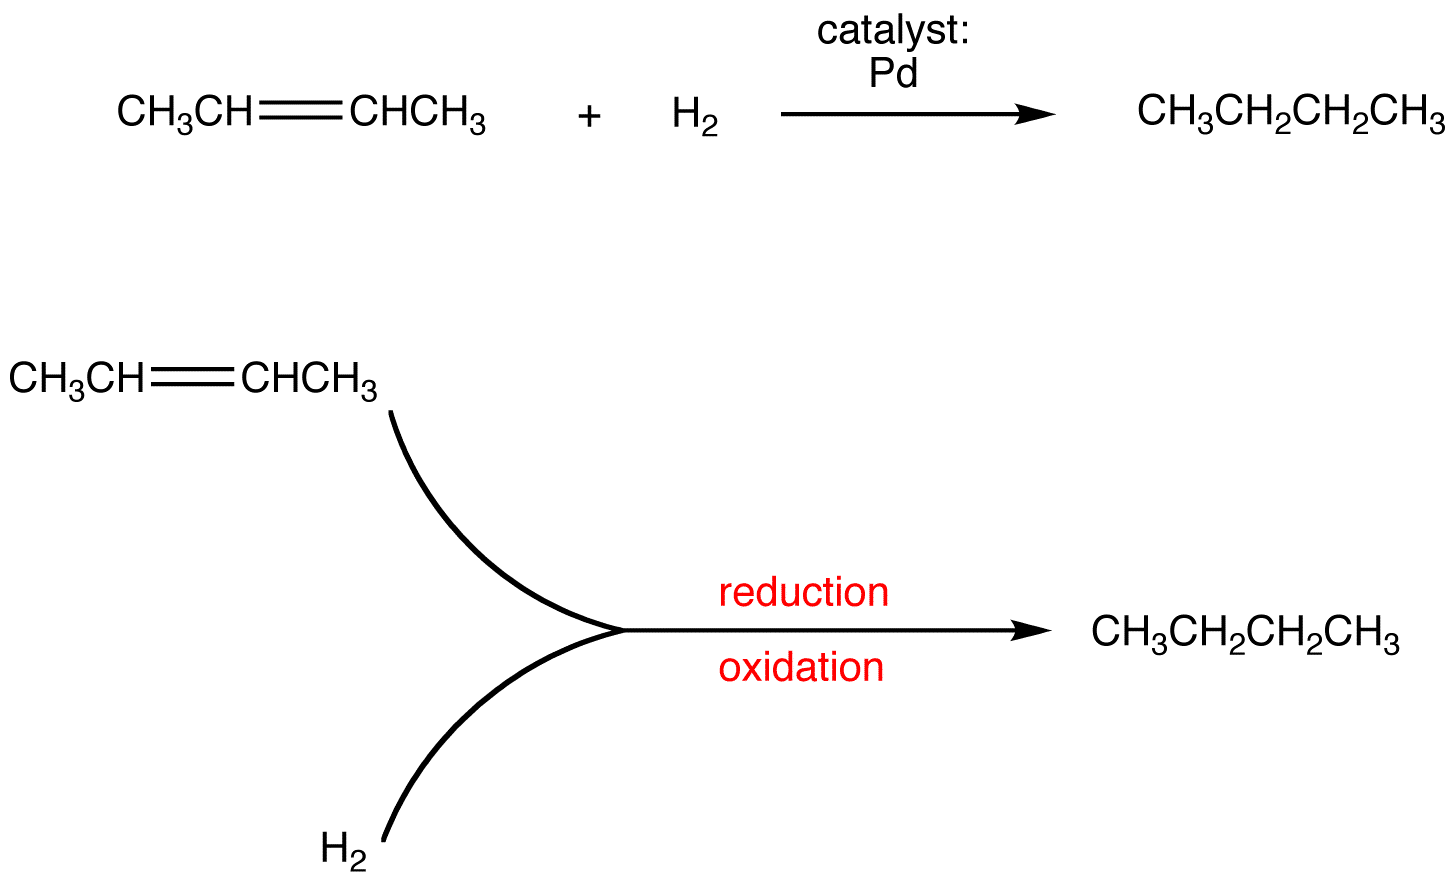 Oxidation Reduction Reaction Chemistry Libretexts